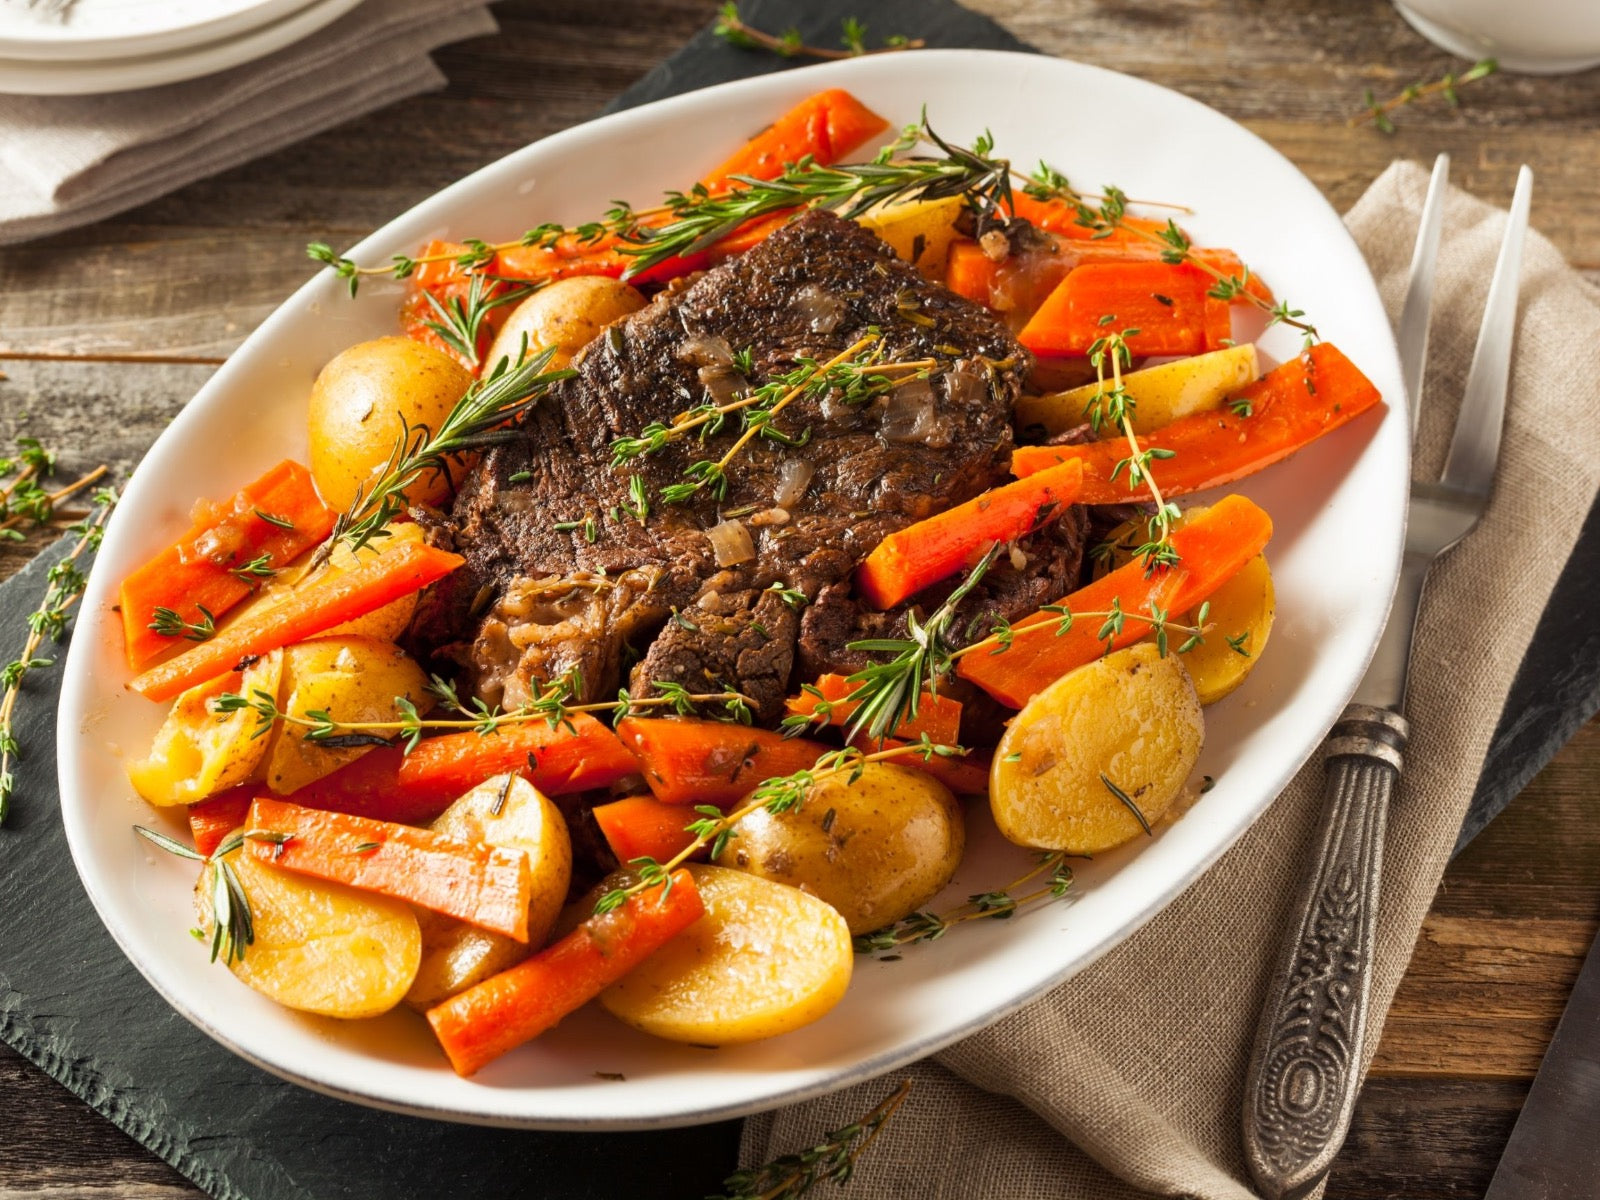 Old Fashioned Pot Roast For Chilly Weather Comfort - Beck & Bulow